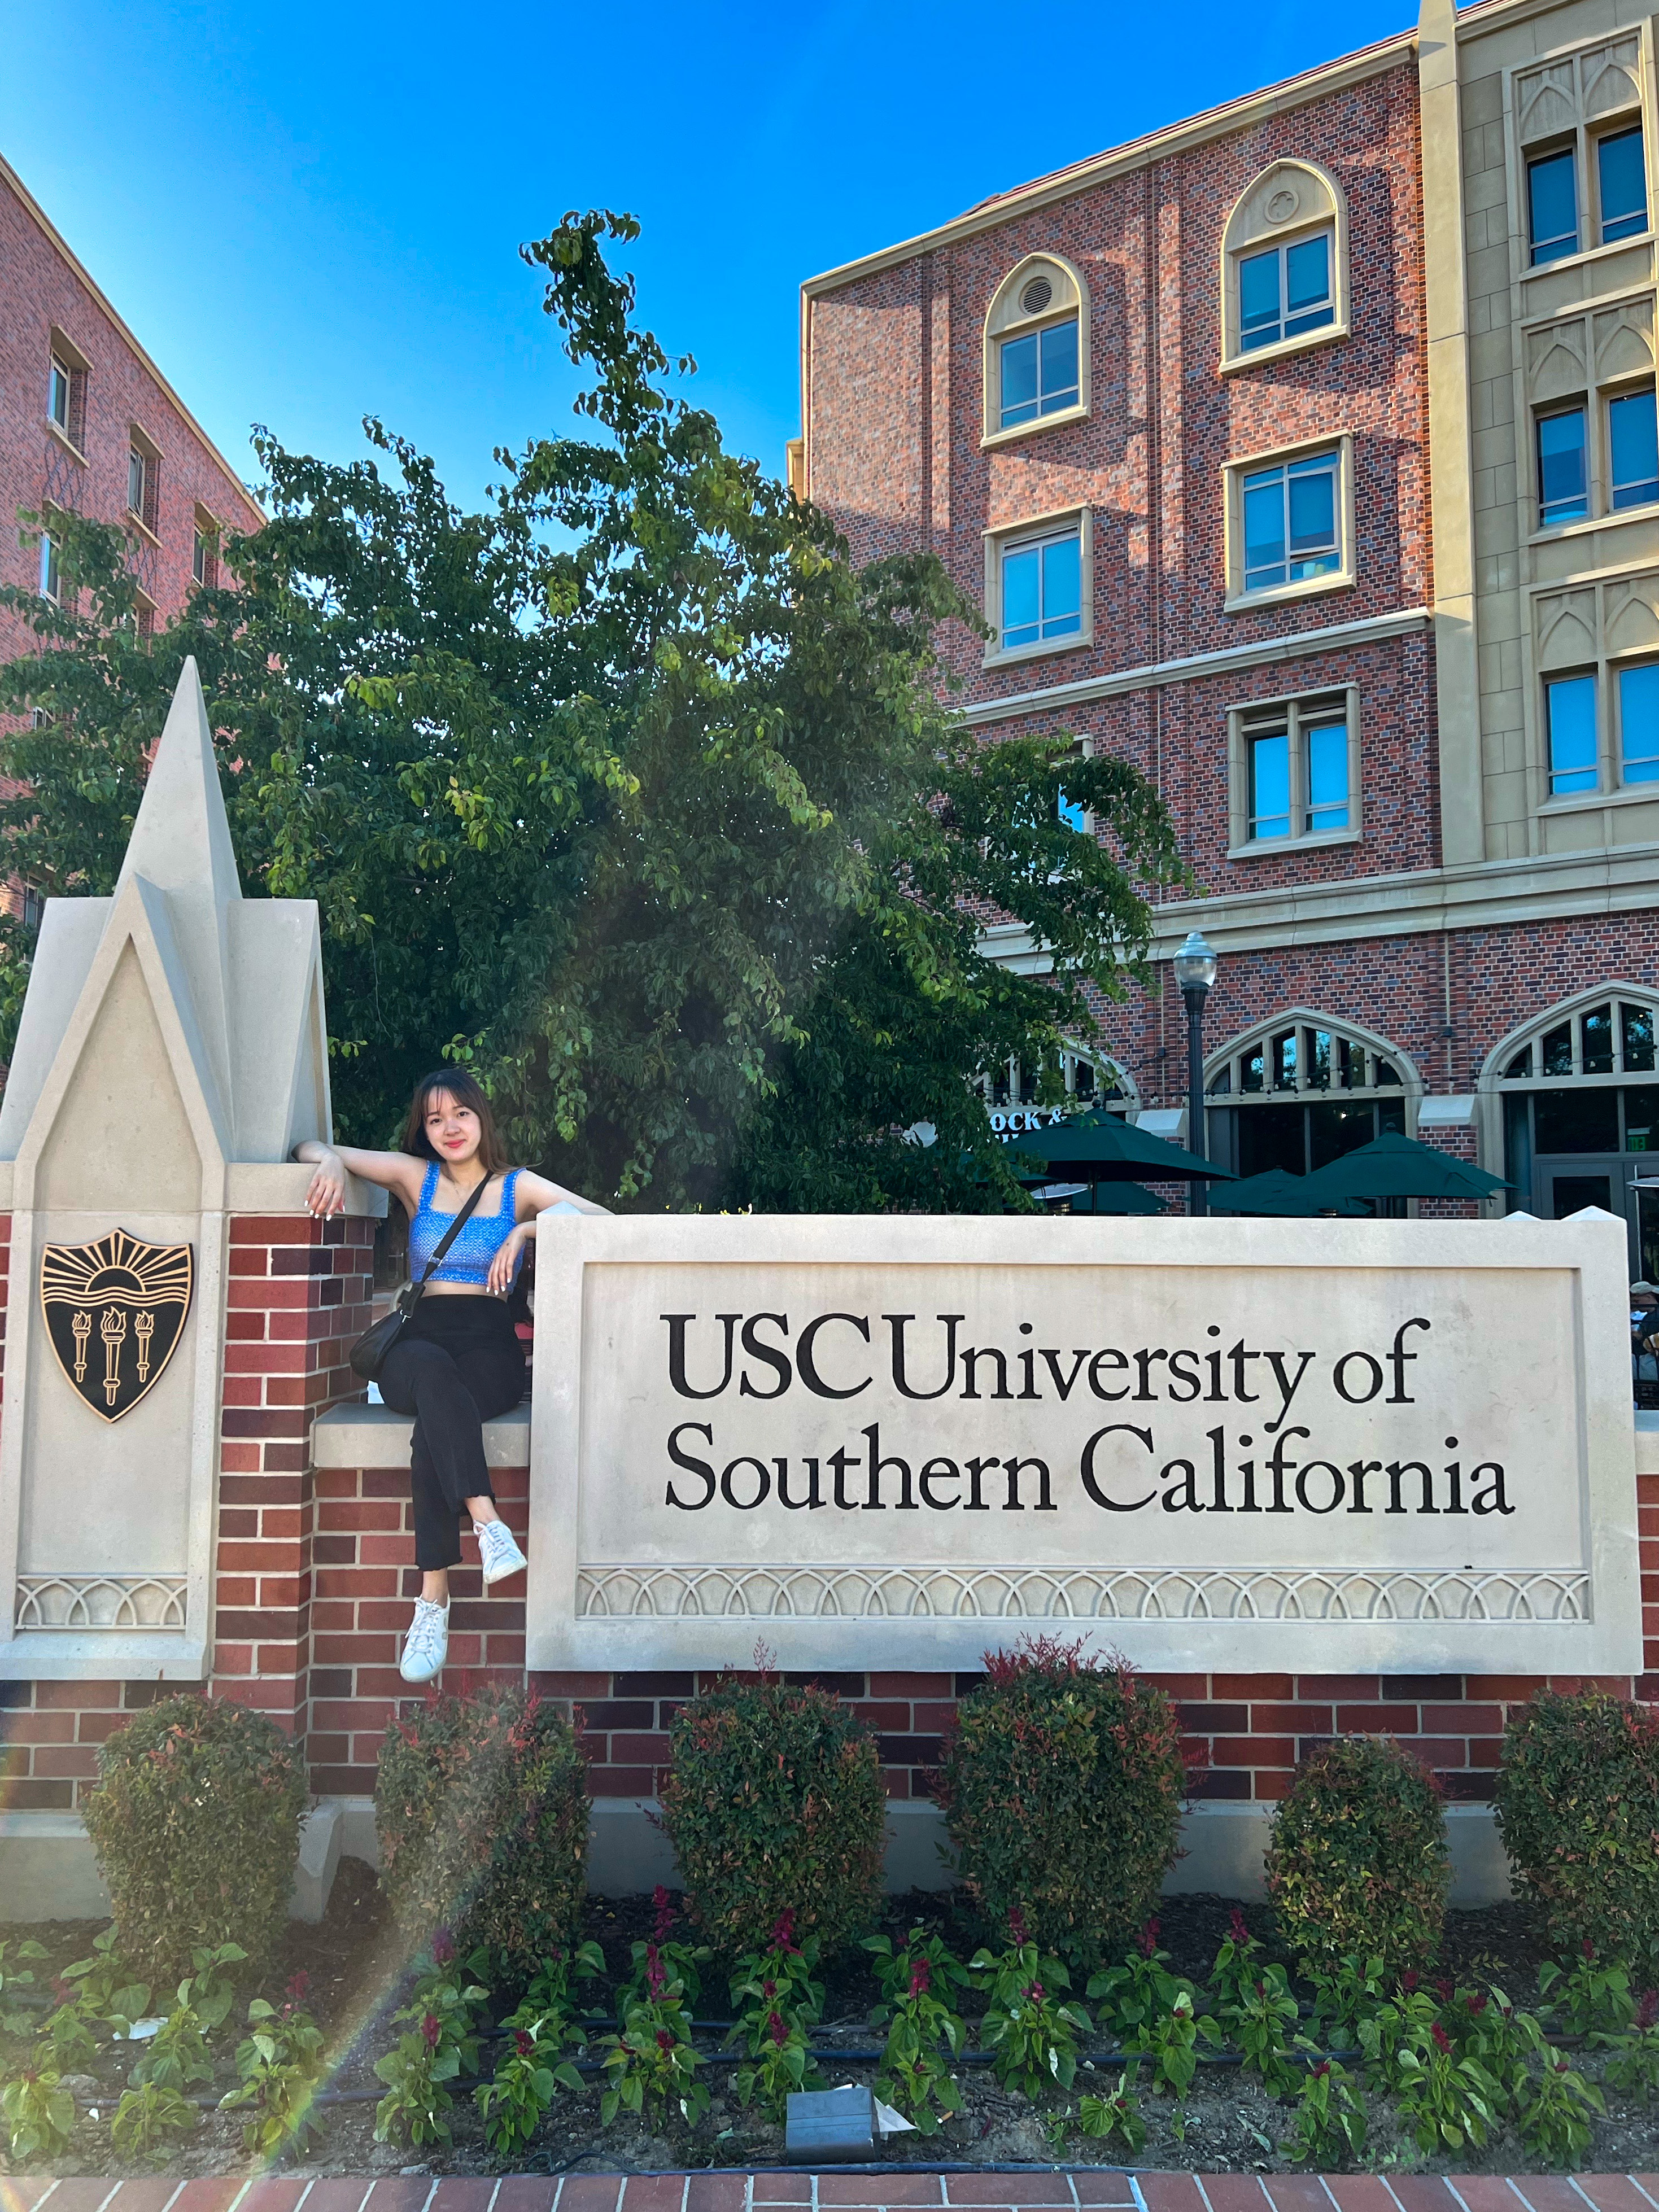 Anson’s final semester as an undergraduate was spent at the University of Southern California.